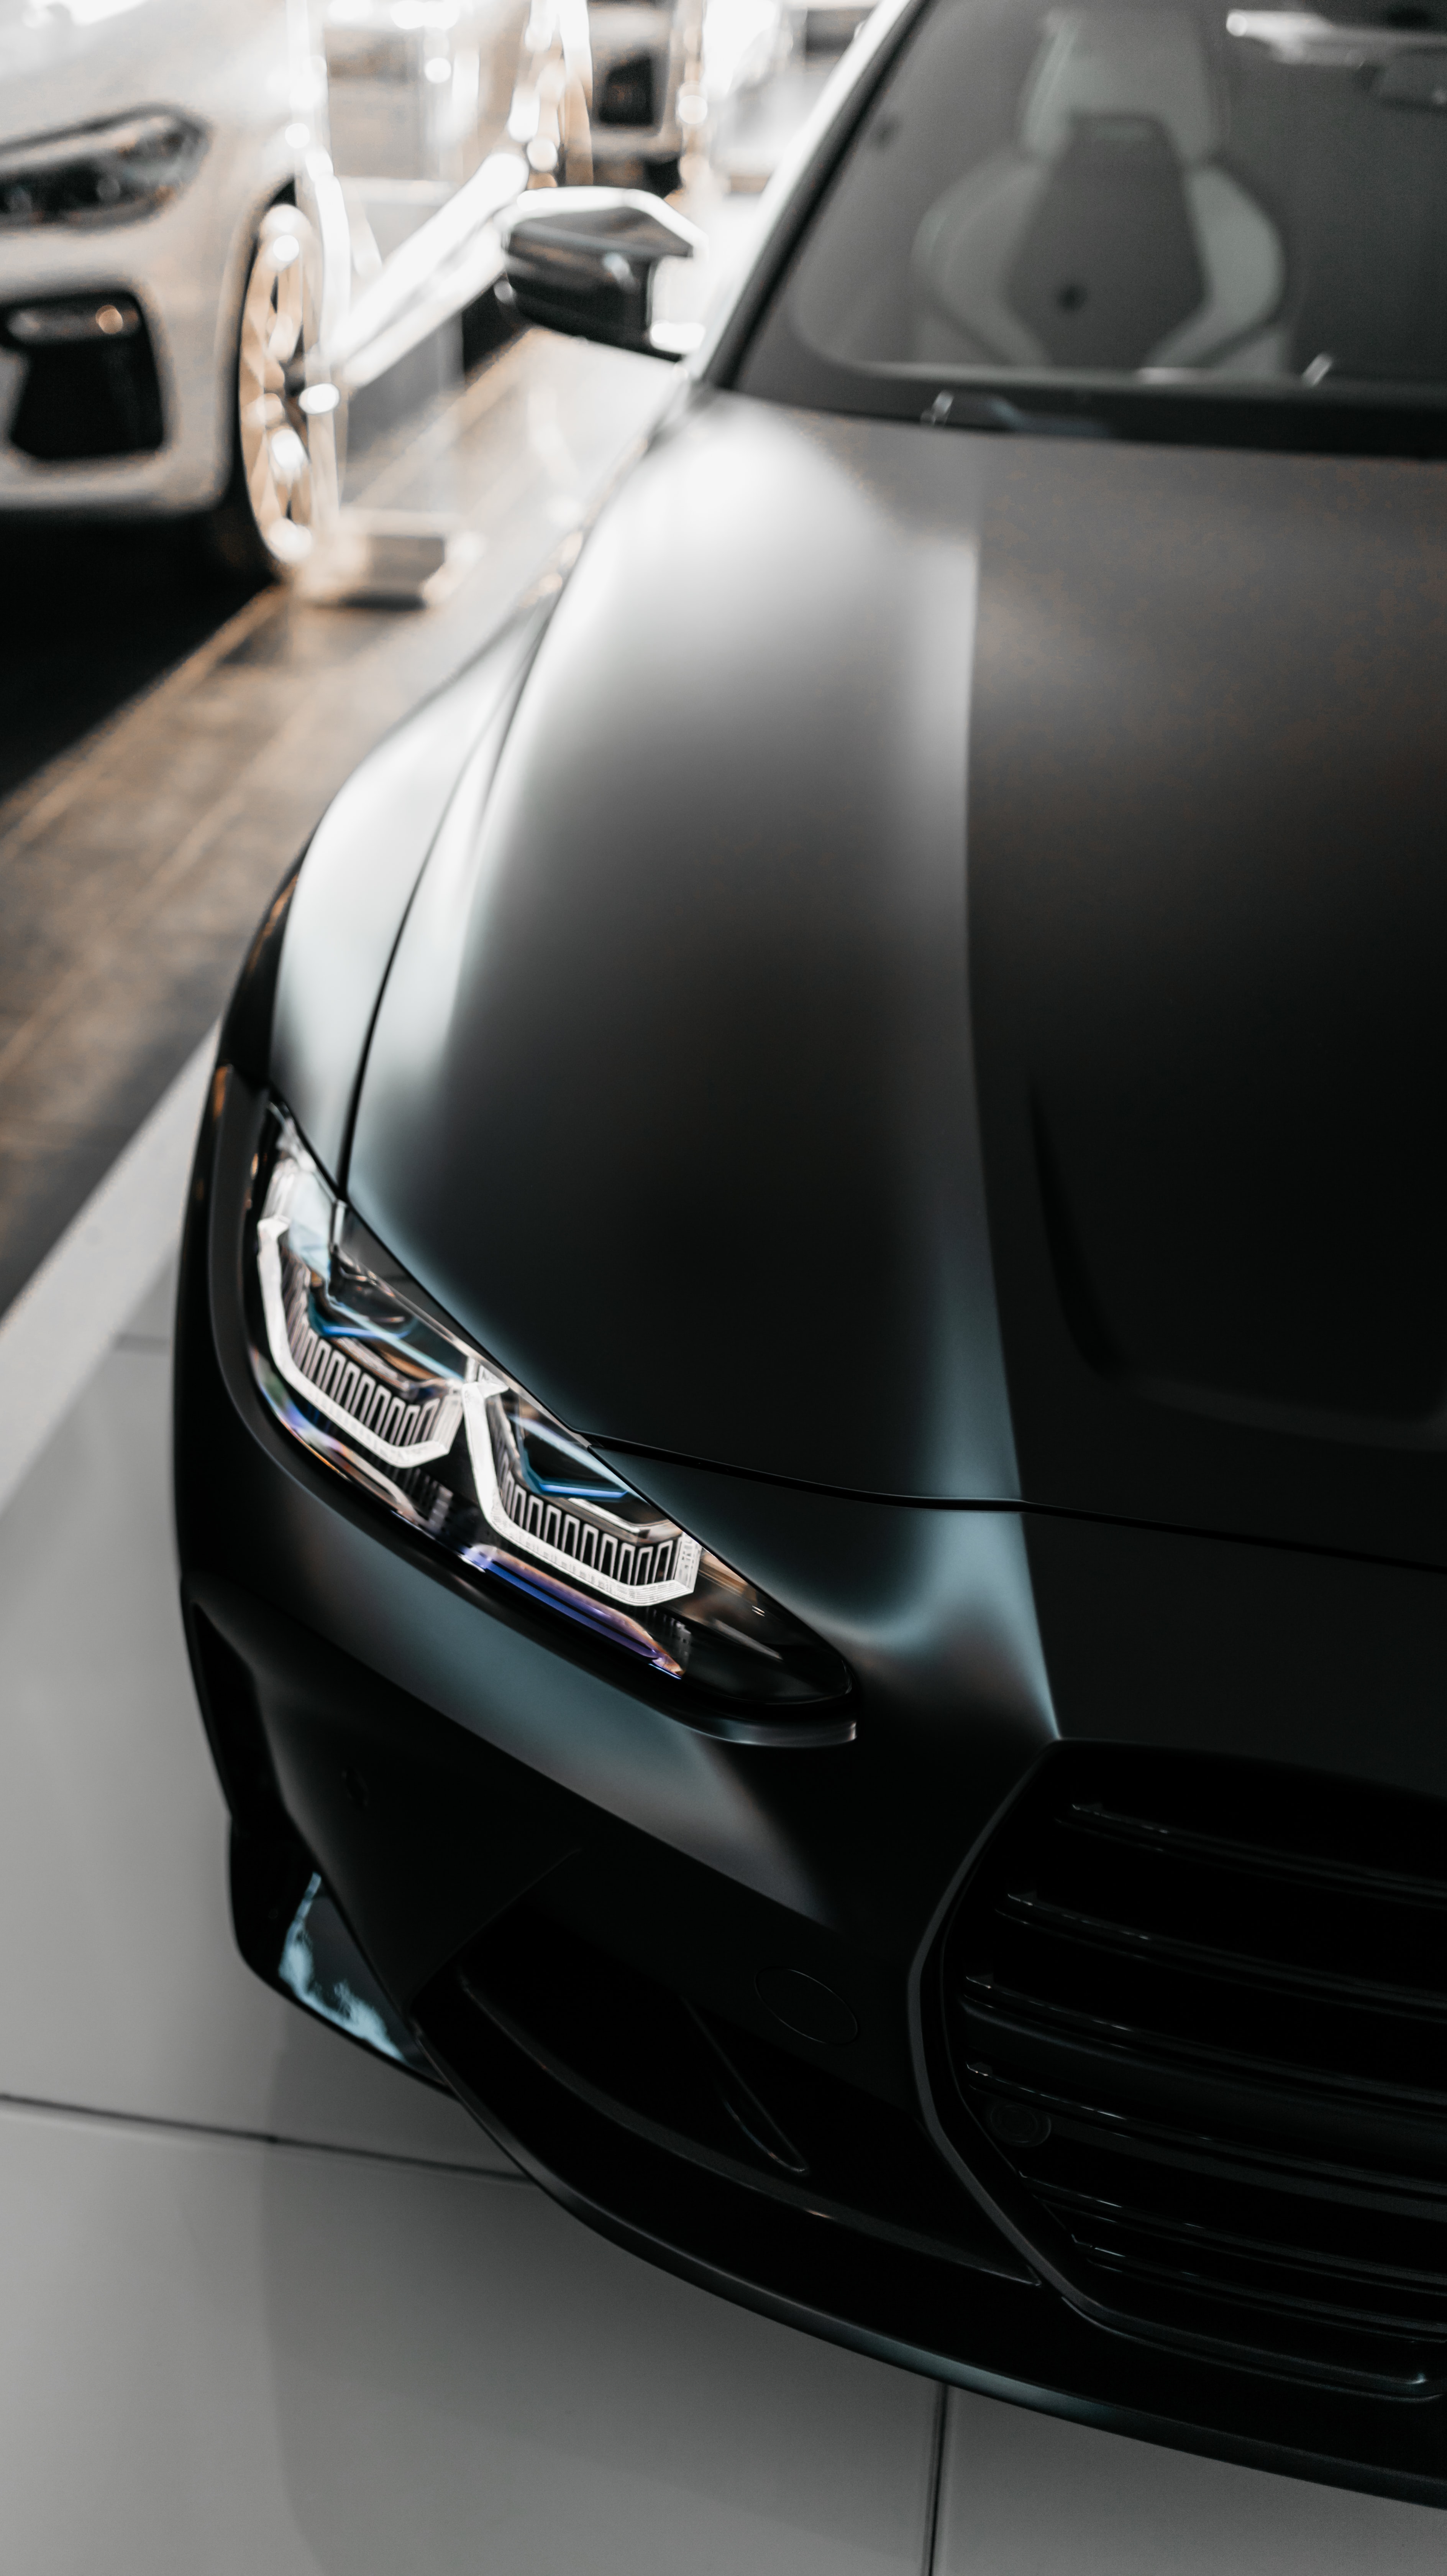 iPhone background headlight, cars, bmw, front view